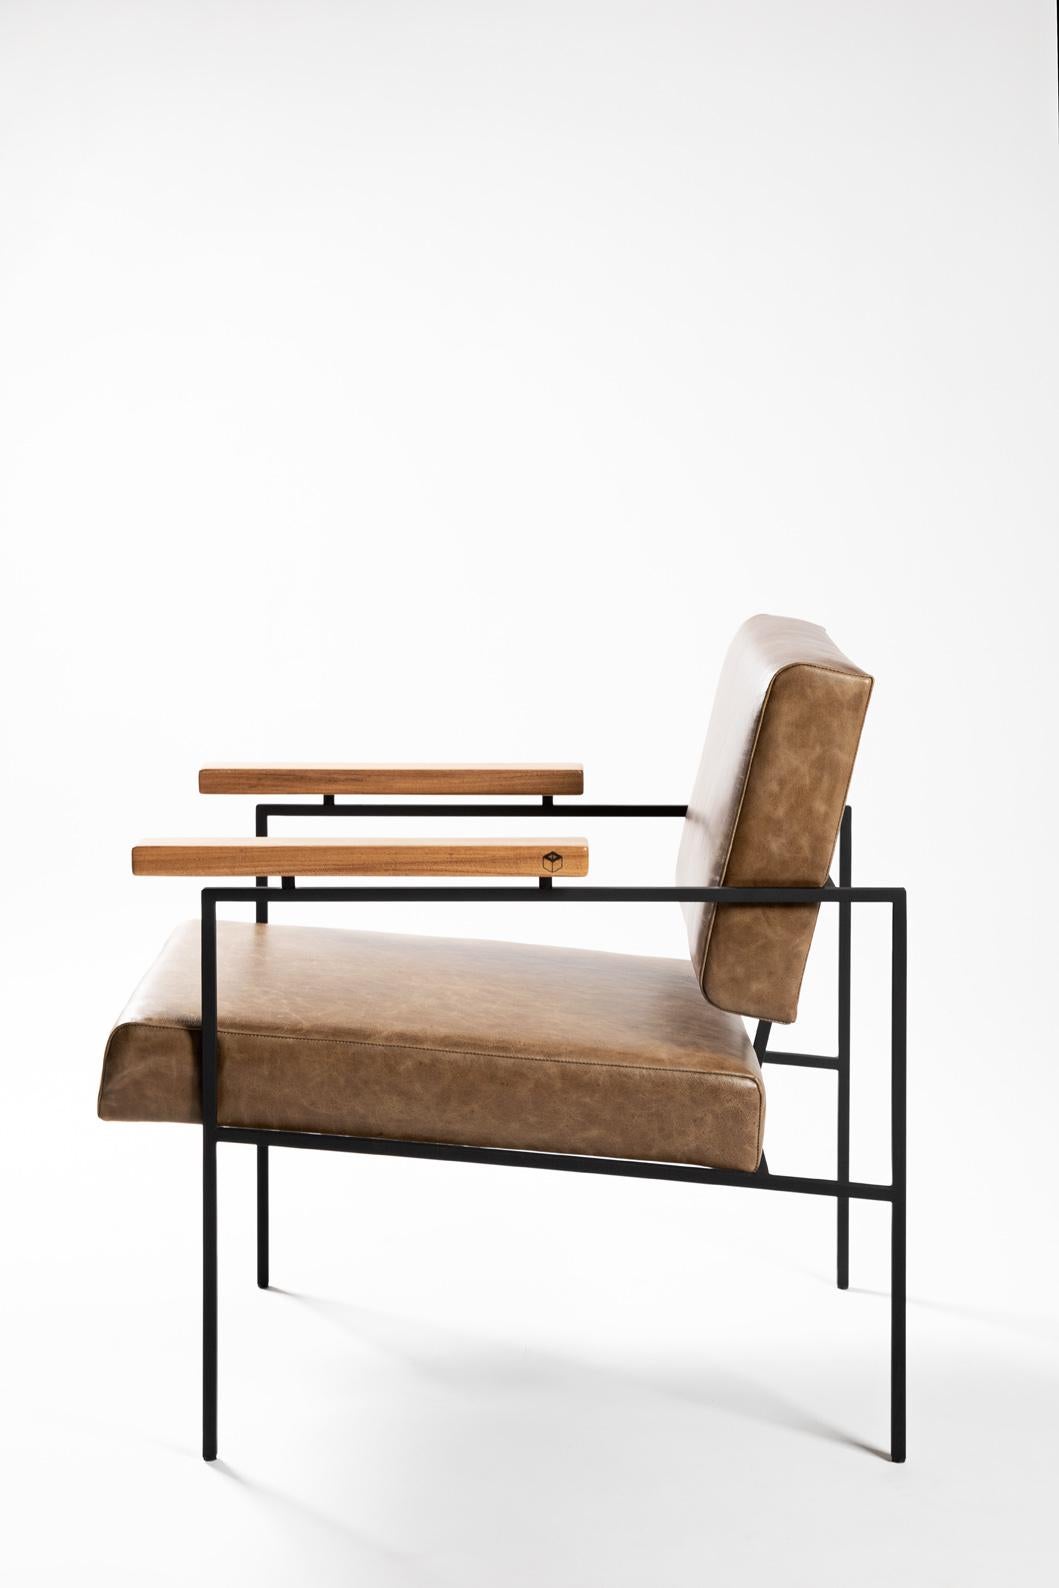 This award winning minimalist armchair 'Helena' designed by Samuel Lamas has an architectonic and geometric reasoning. The aim is to create a simple chair, with pure geometric shapes. Its square crossbars in solid iron create a perfect meeting point